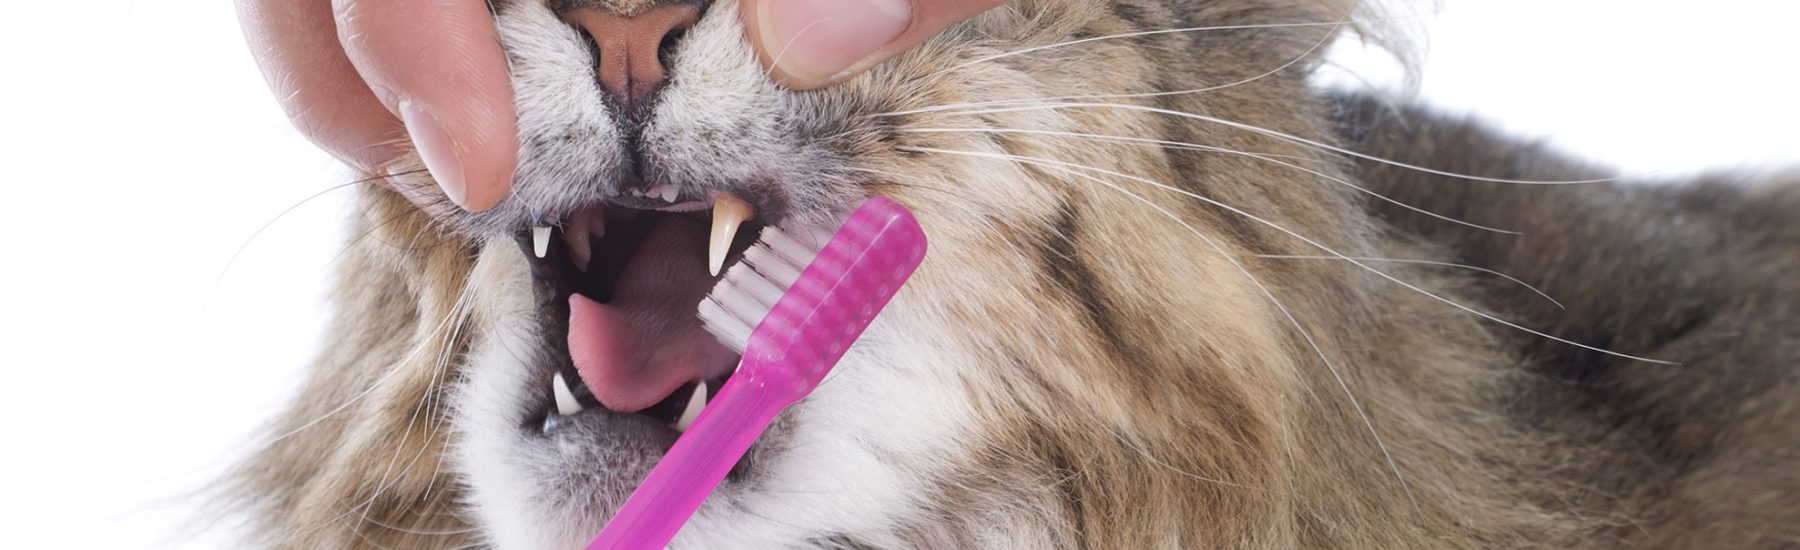 Cat getting its teeth brushed